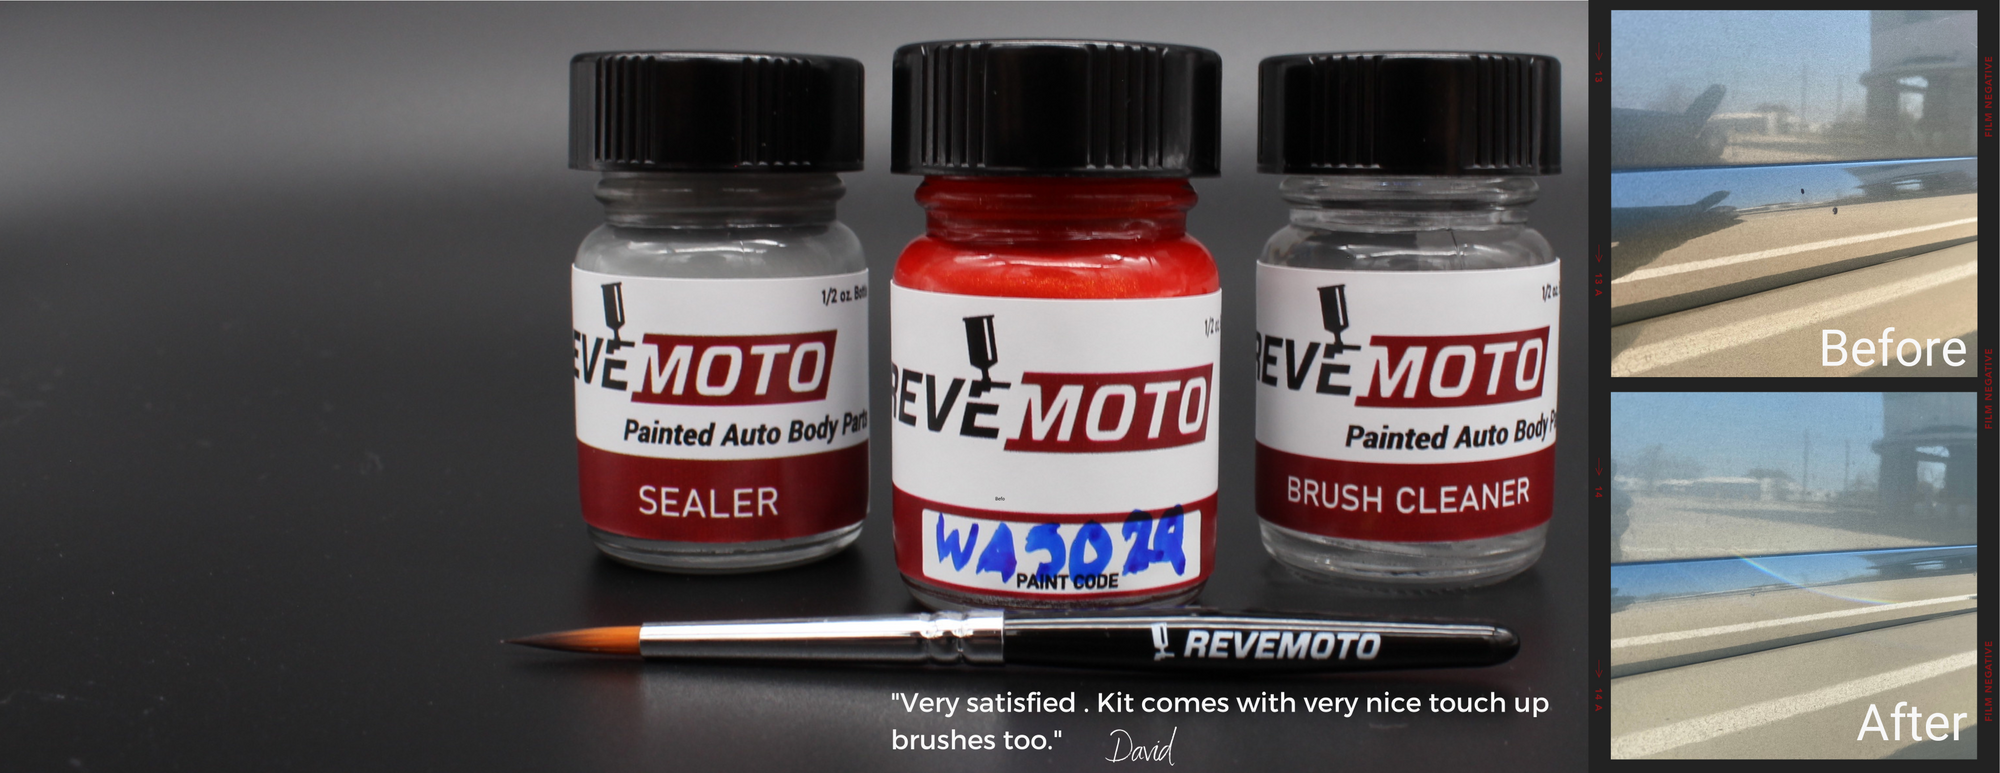 Automotive Touch Up Paint - Before and After Scratch and Paint Chips - ReveMoto Touch Up Paint